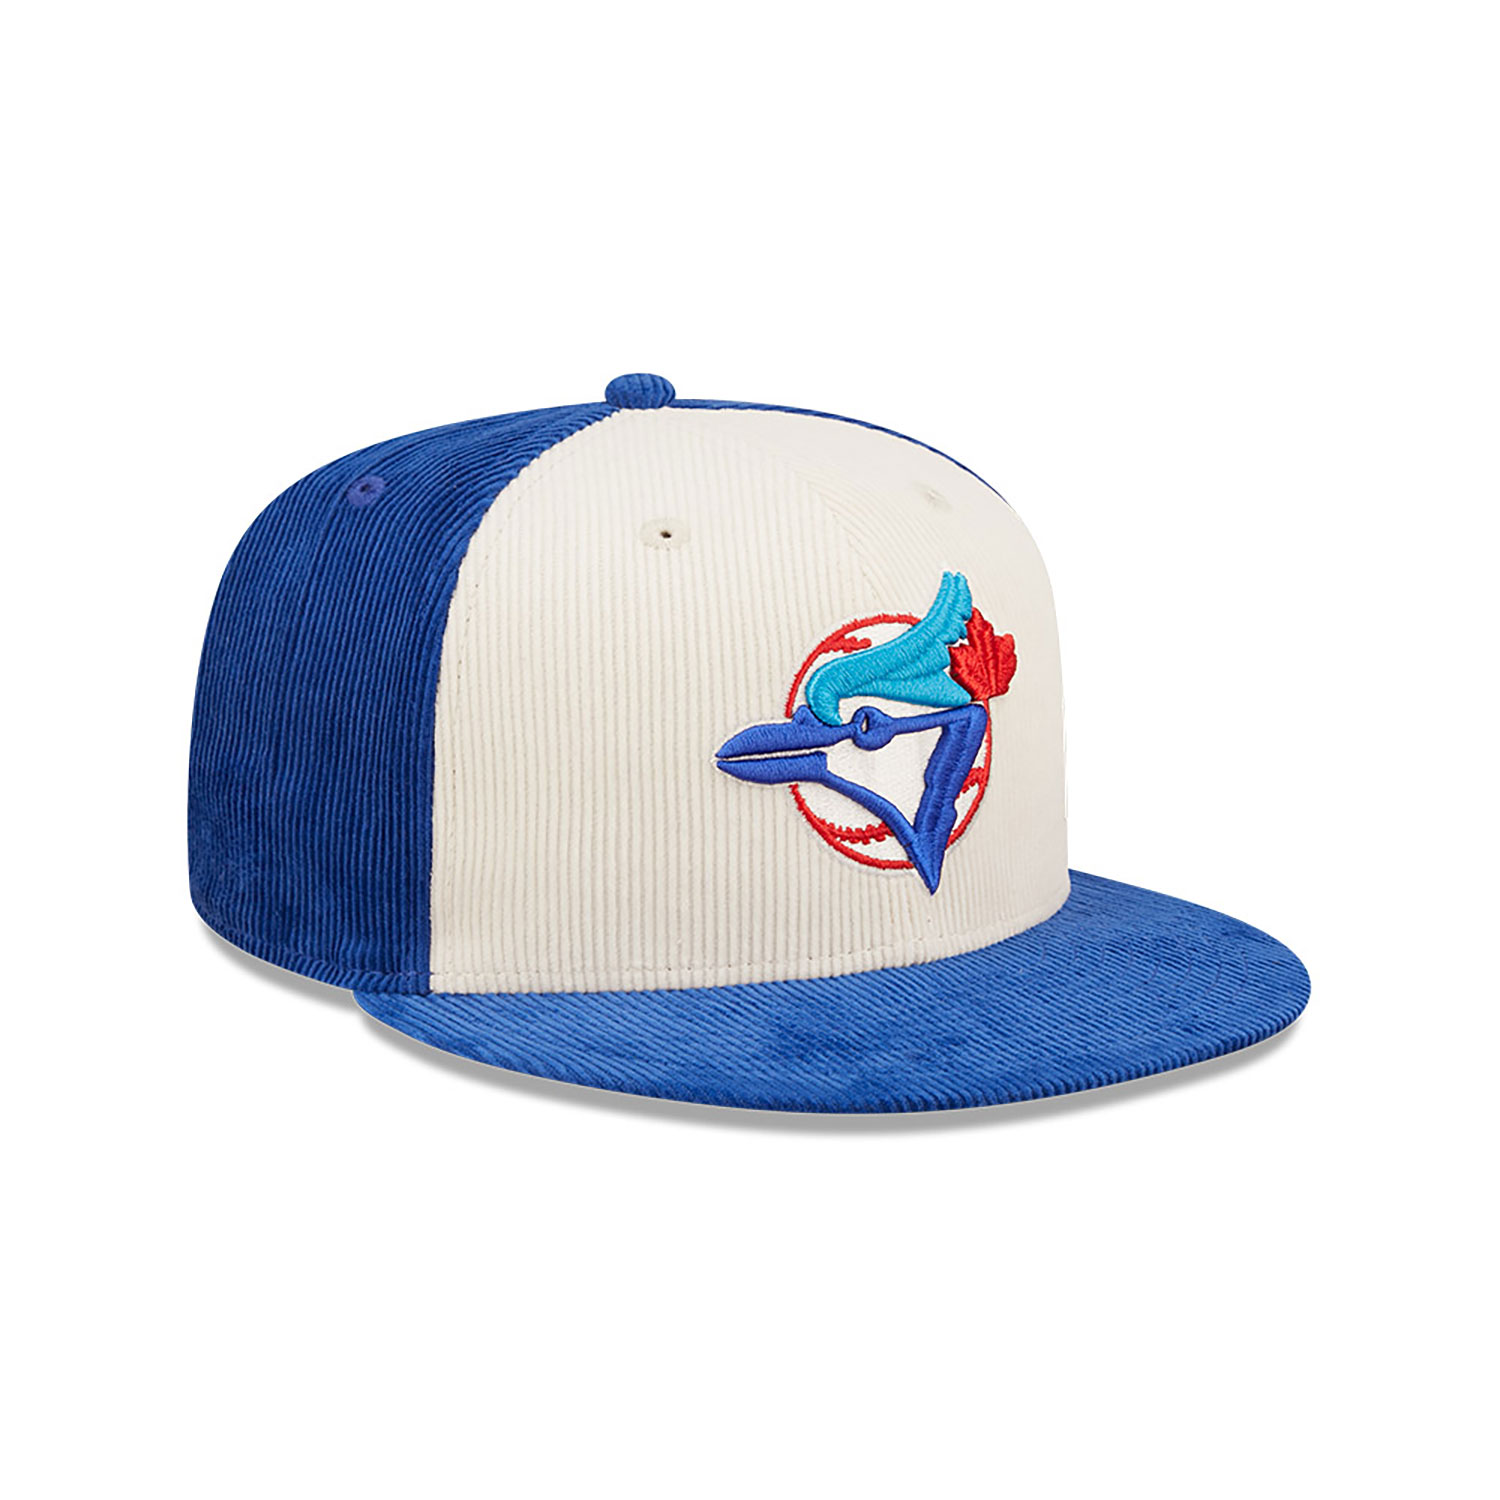 Toronto Blue Jays Cooperstown Blue 59FIFTY Fitted Cap